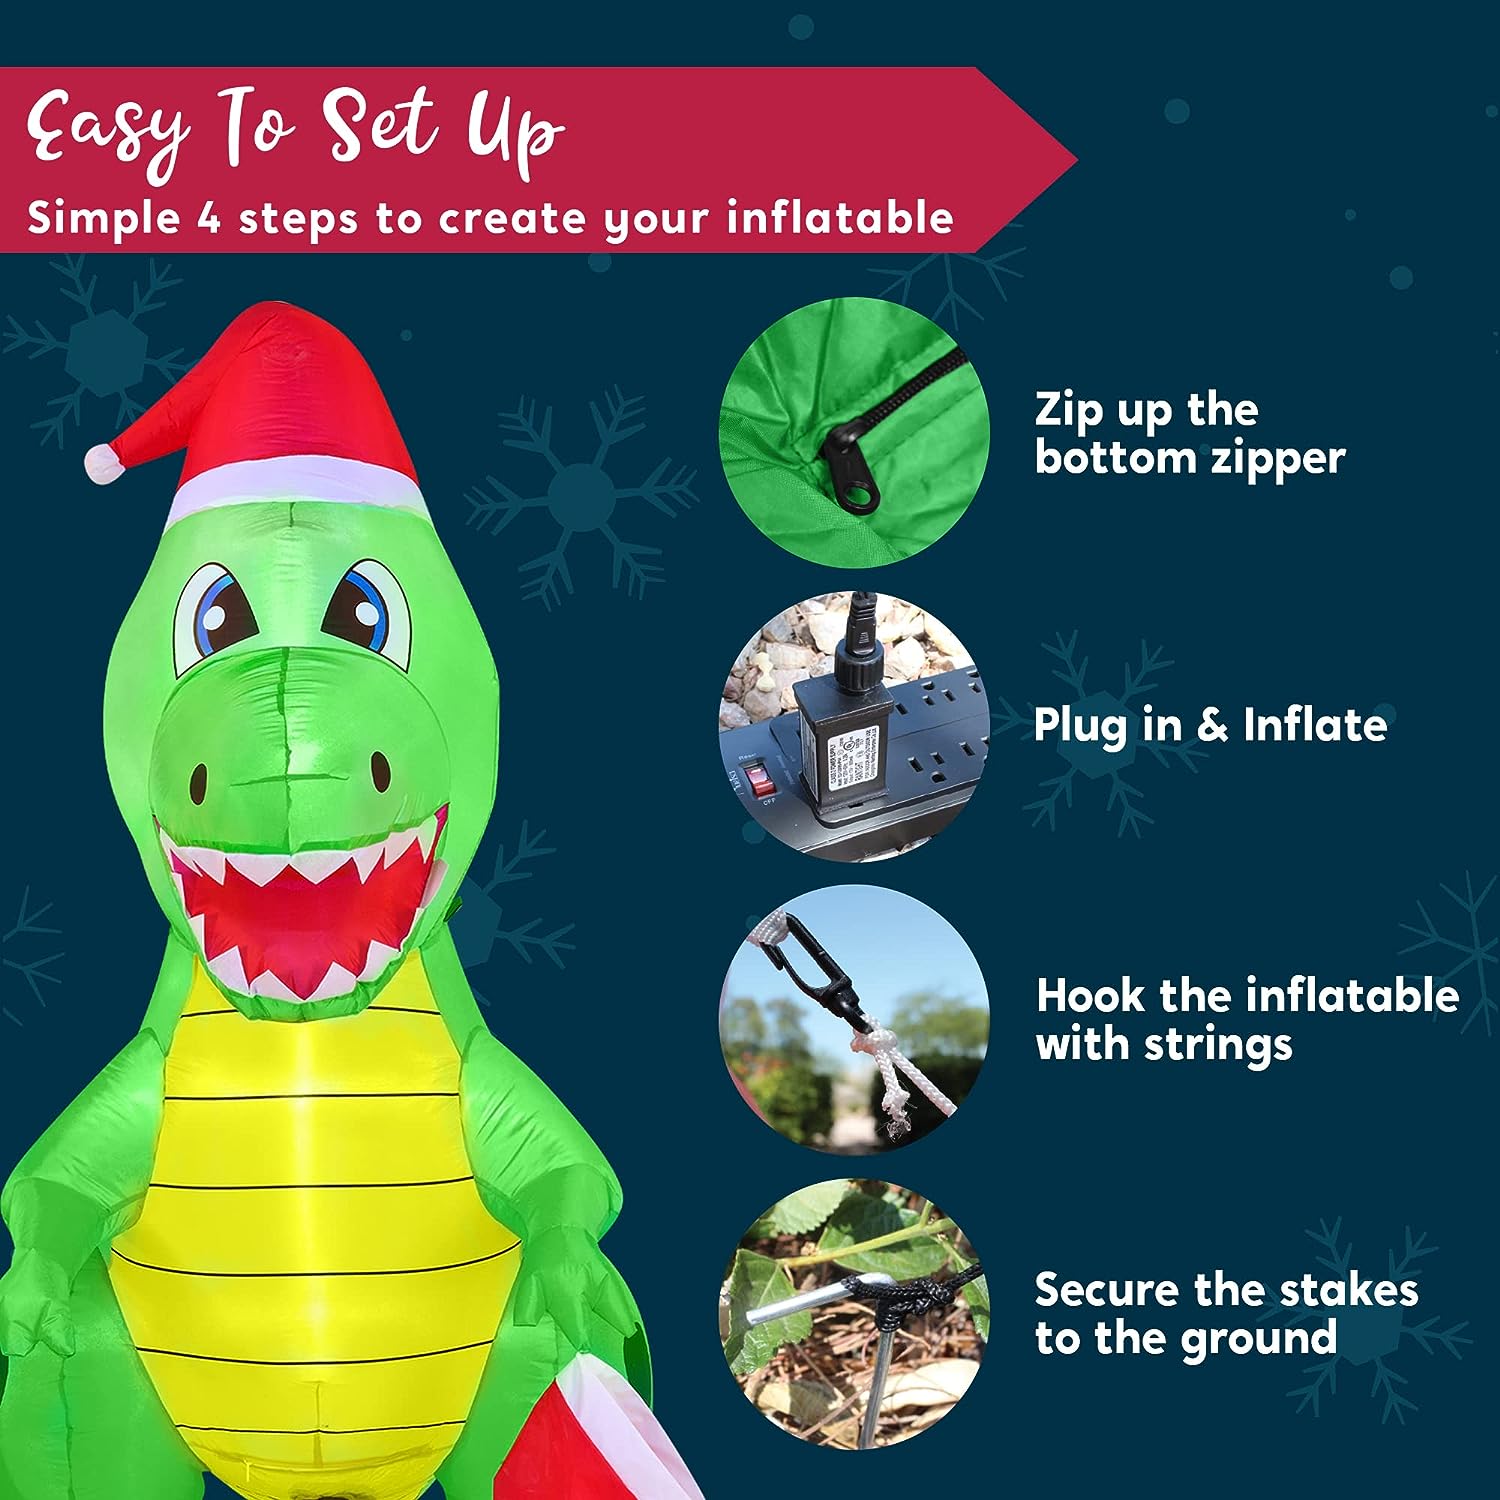 6 FT Christmas Inflatable Dinosaur, Dinosaur Holding a Christmas Stocking with Build-in LEDs, Blow Up Inflatables for Christmas Party, Outdoor, Yard, Garden, Lawn Decorations